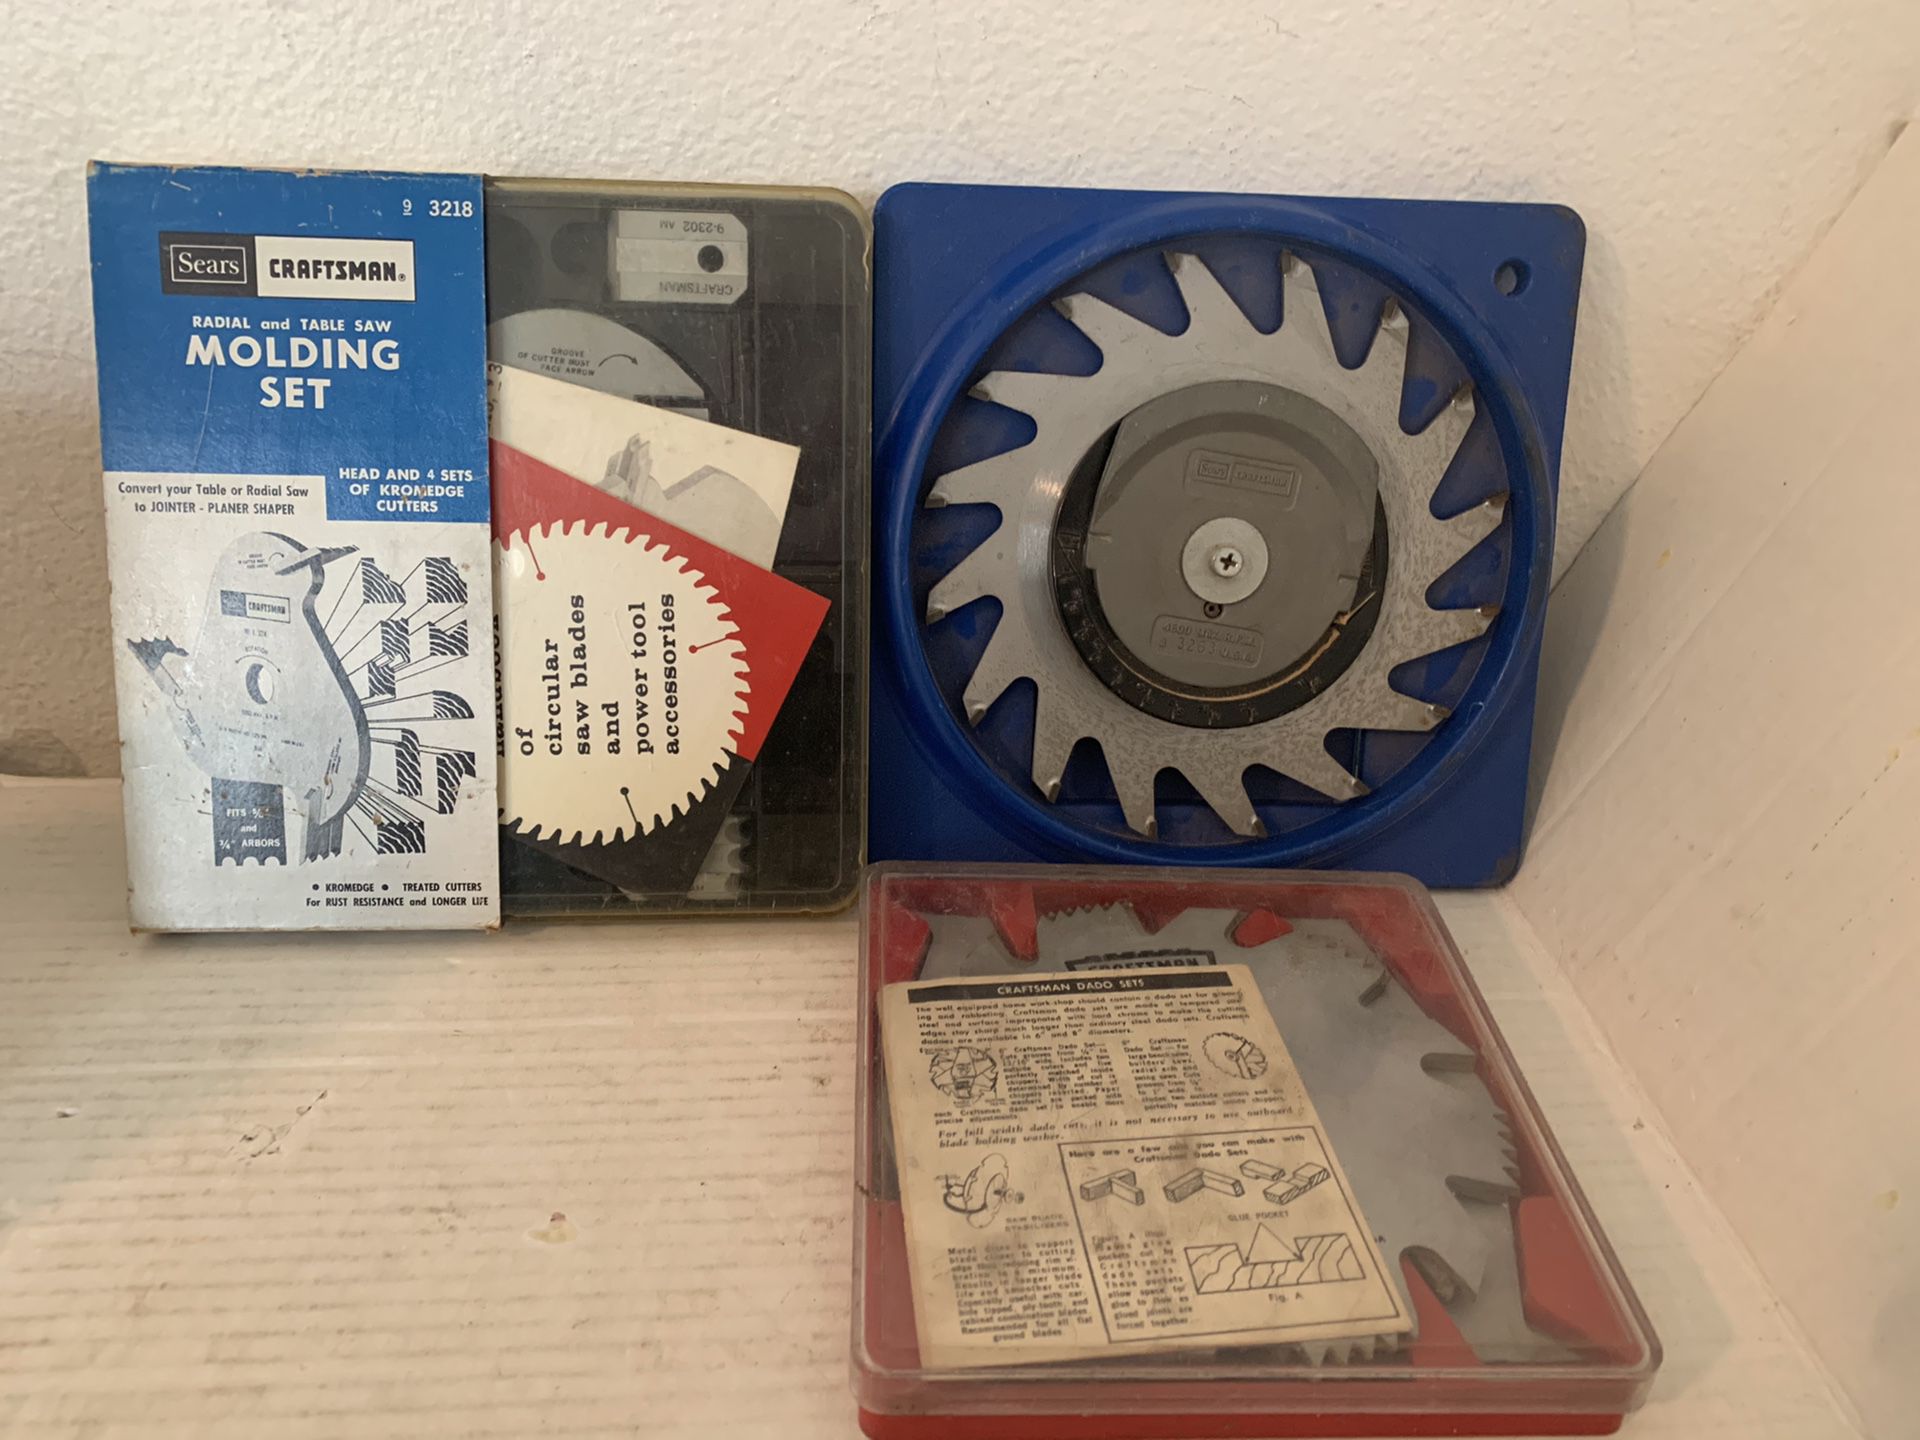 3 Sears Craftsman Saw Blades- Radial and Table Saw Molding 2 Kromedge